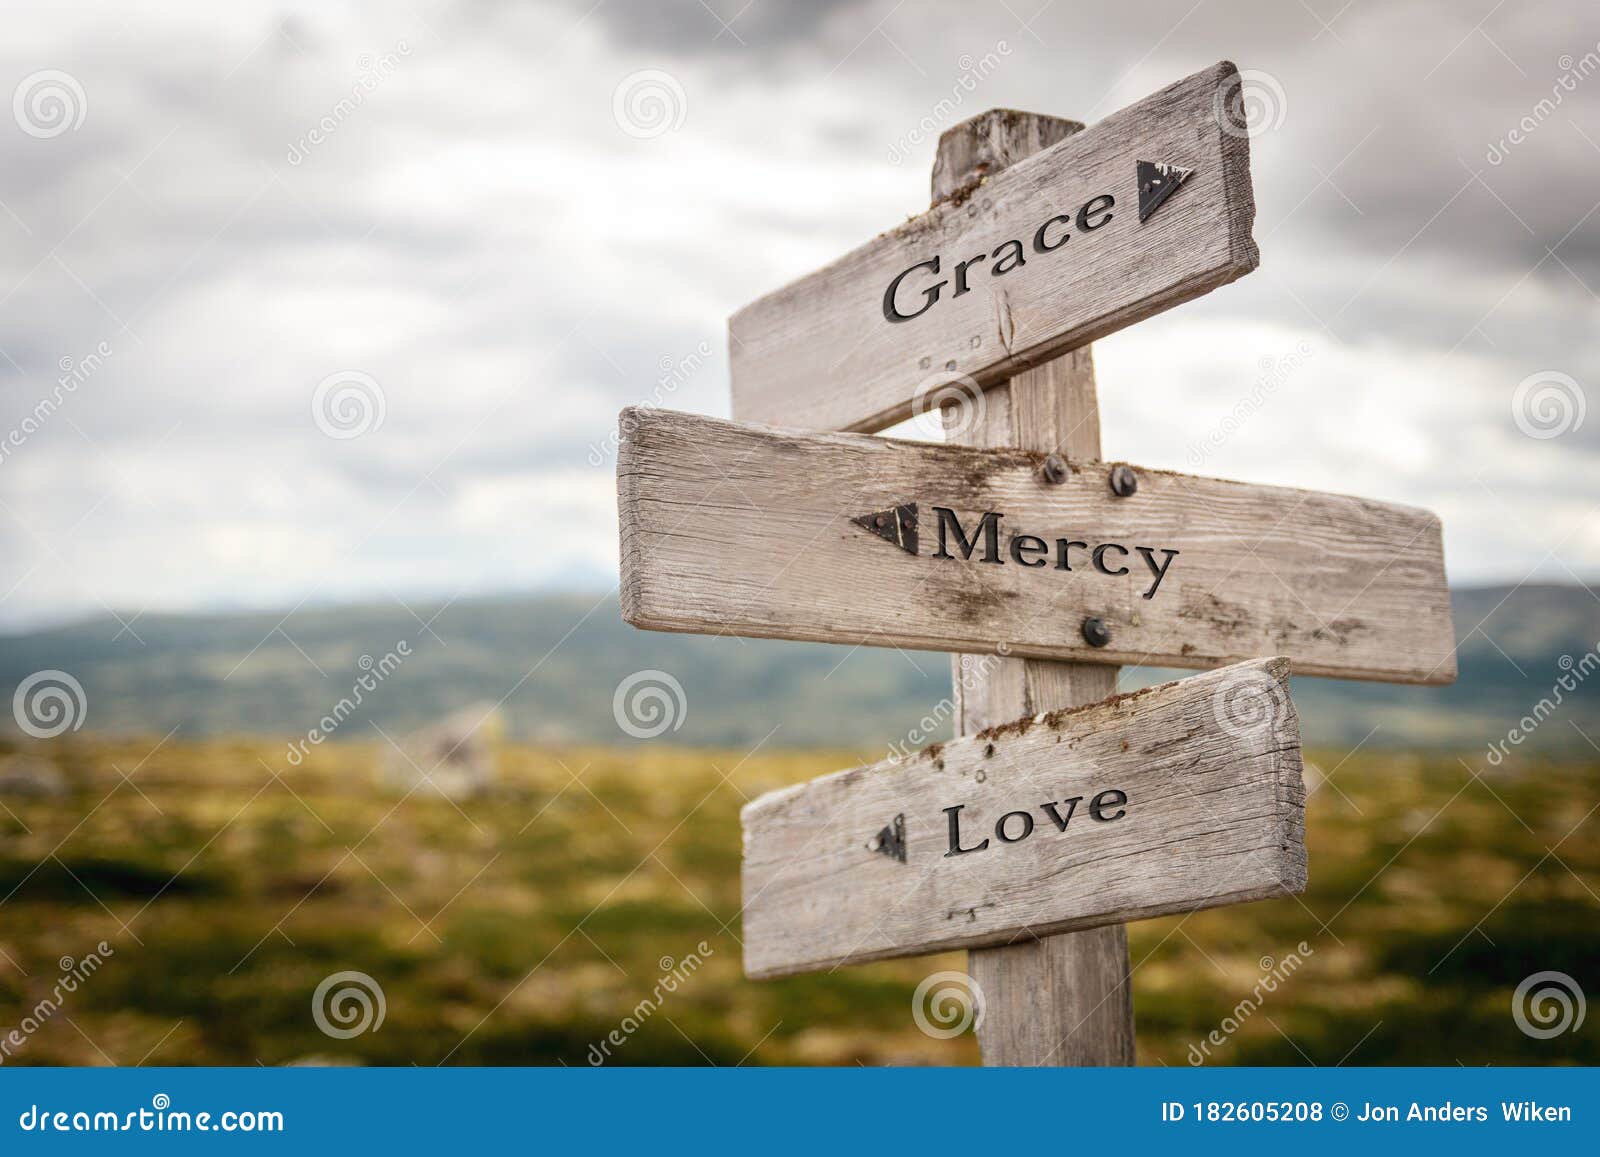 Mercy Quotes Photos Free Royalty Free Stock Photos From Dreamstime